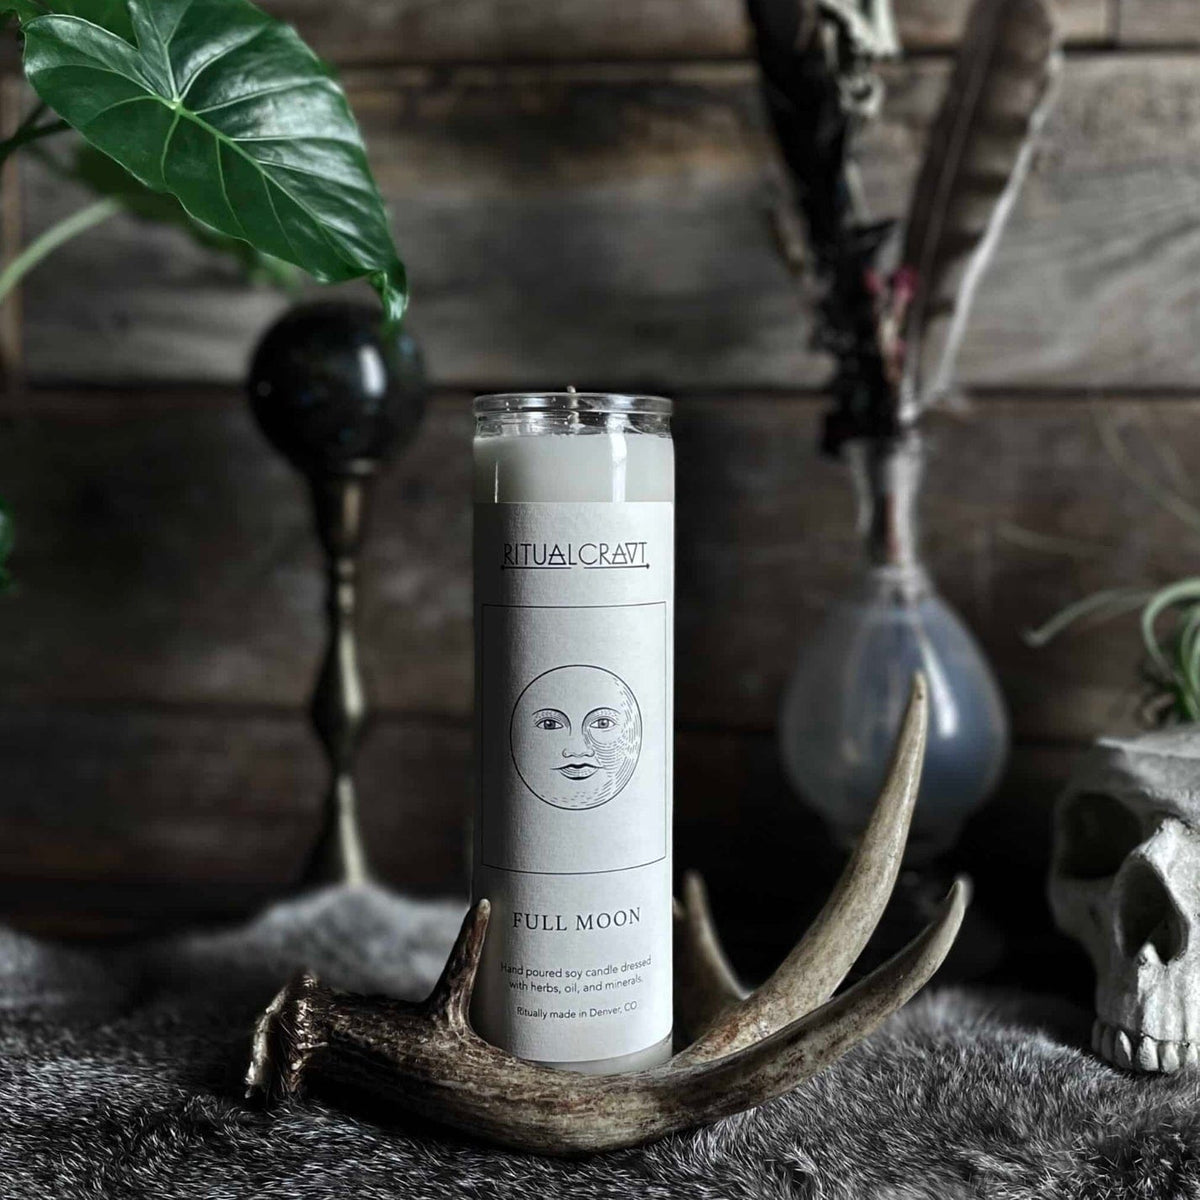 Ritualcravt Full Moon | Dressed Candle